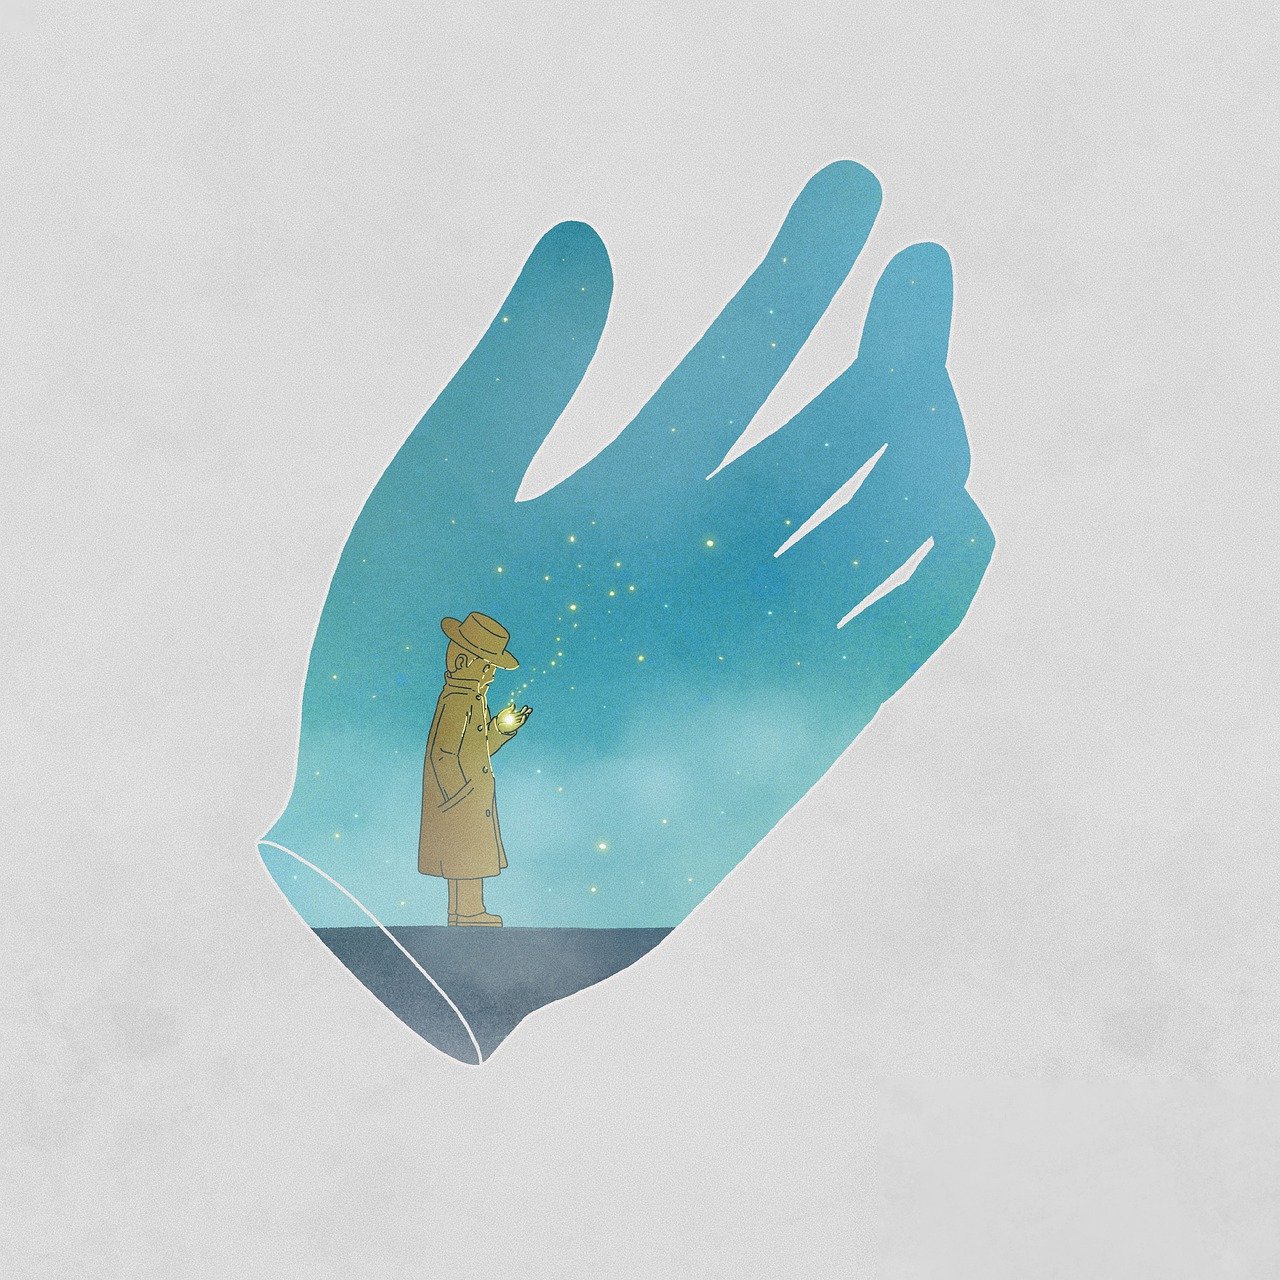 a person that is holding something in their hand, inspired by Jakub Schikaneder, conceptual art, the little prince, hamsa hand, atey ghailan and steve mccurry, without text